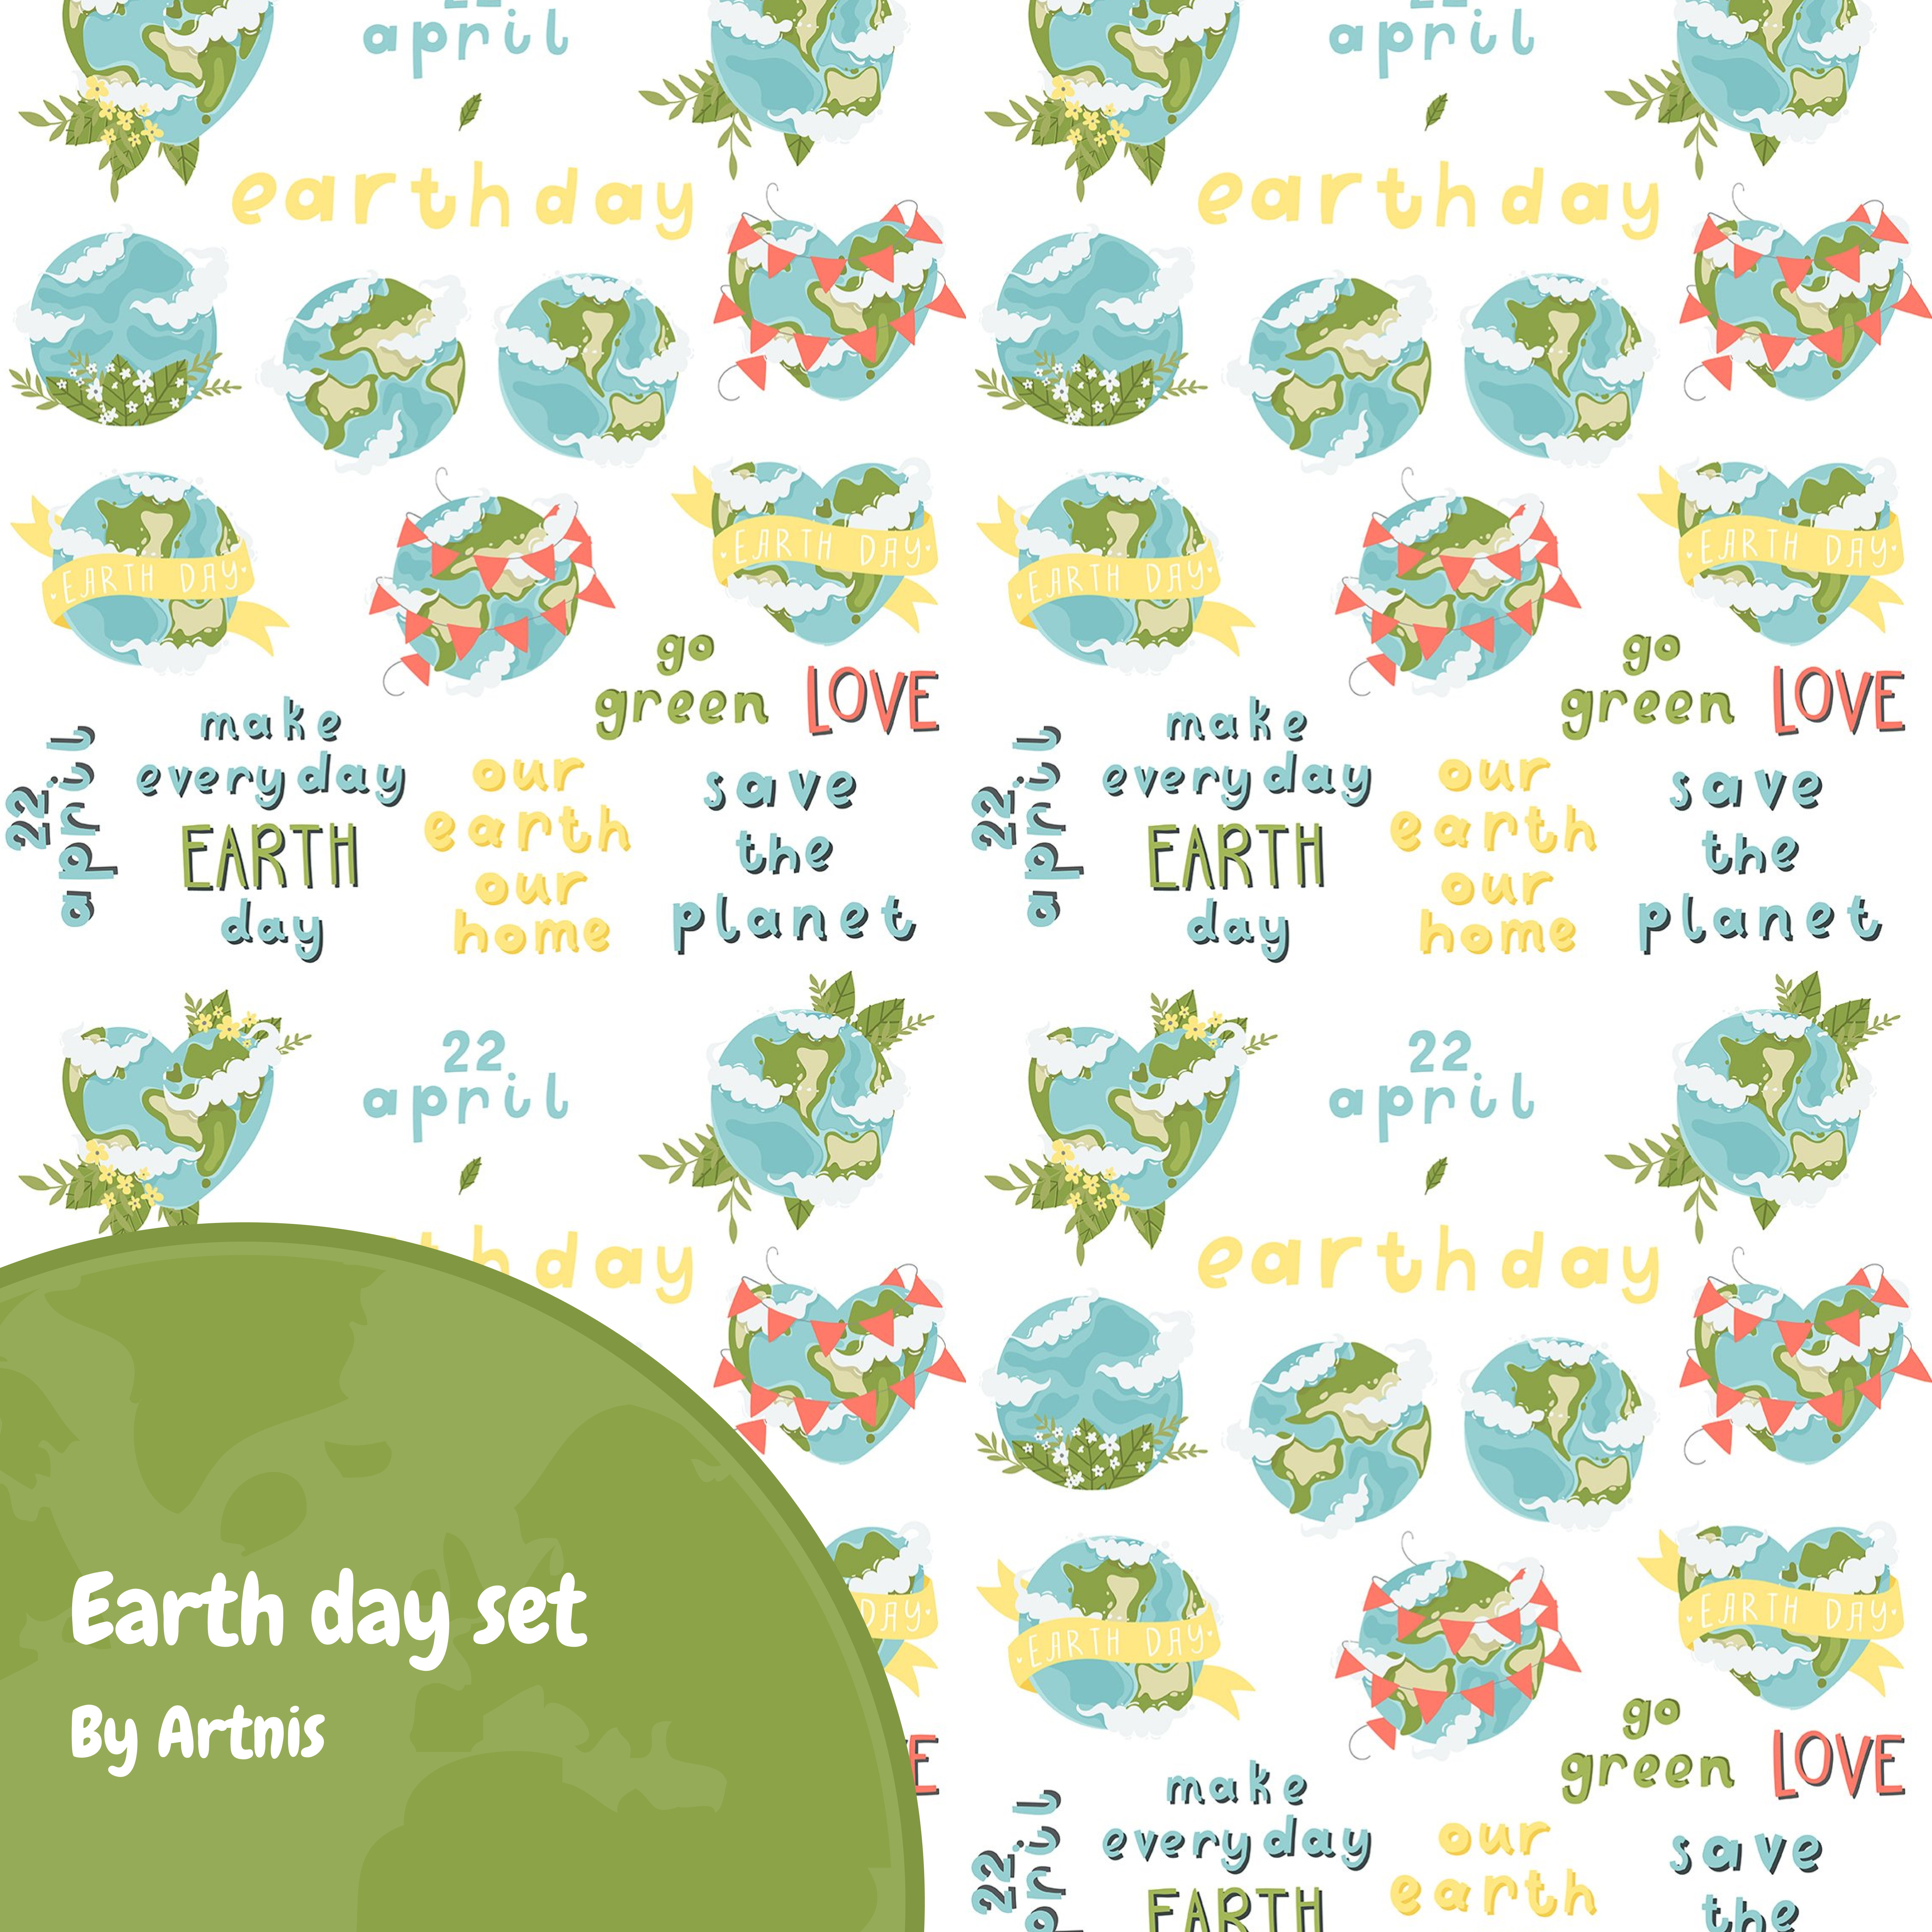 Preview earth day set.